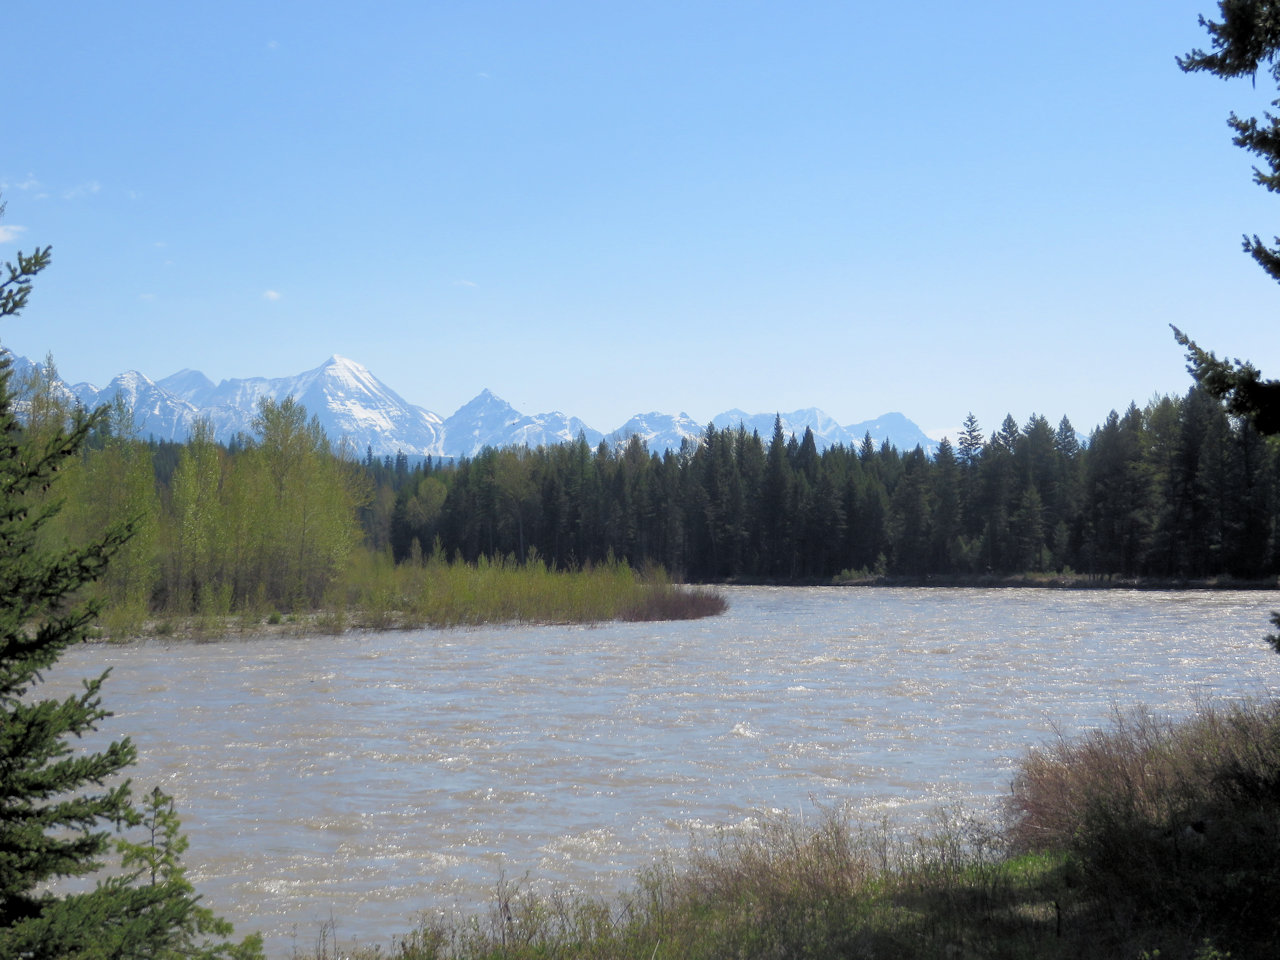 North Fork Flathead River at Ford Landing, May 16, 2018 - by William K. Walker